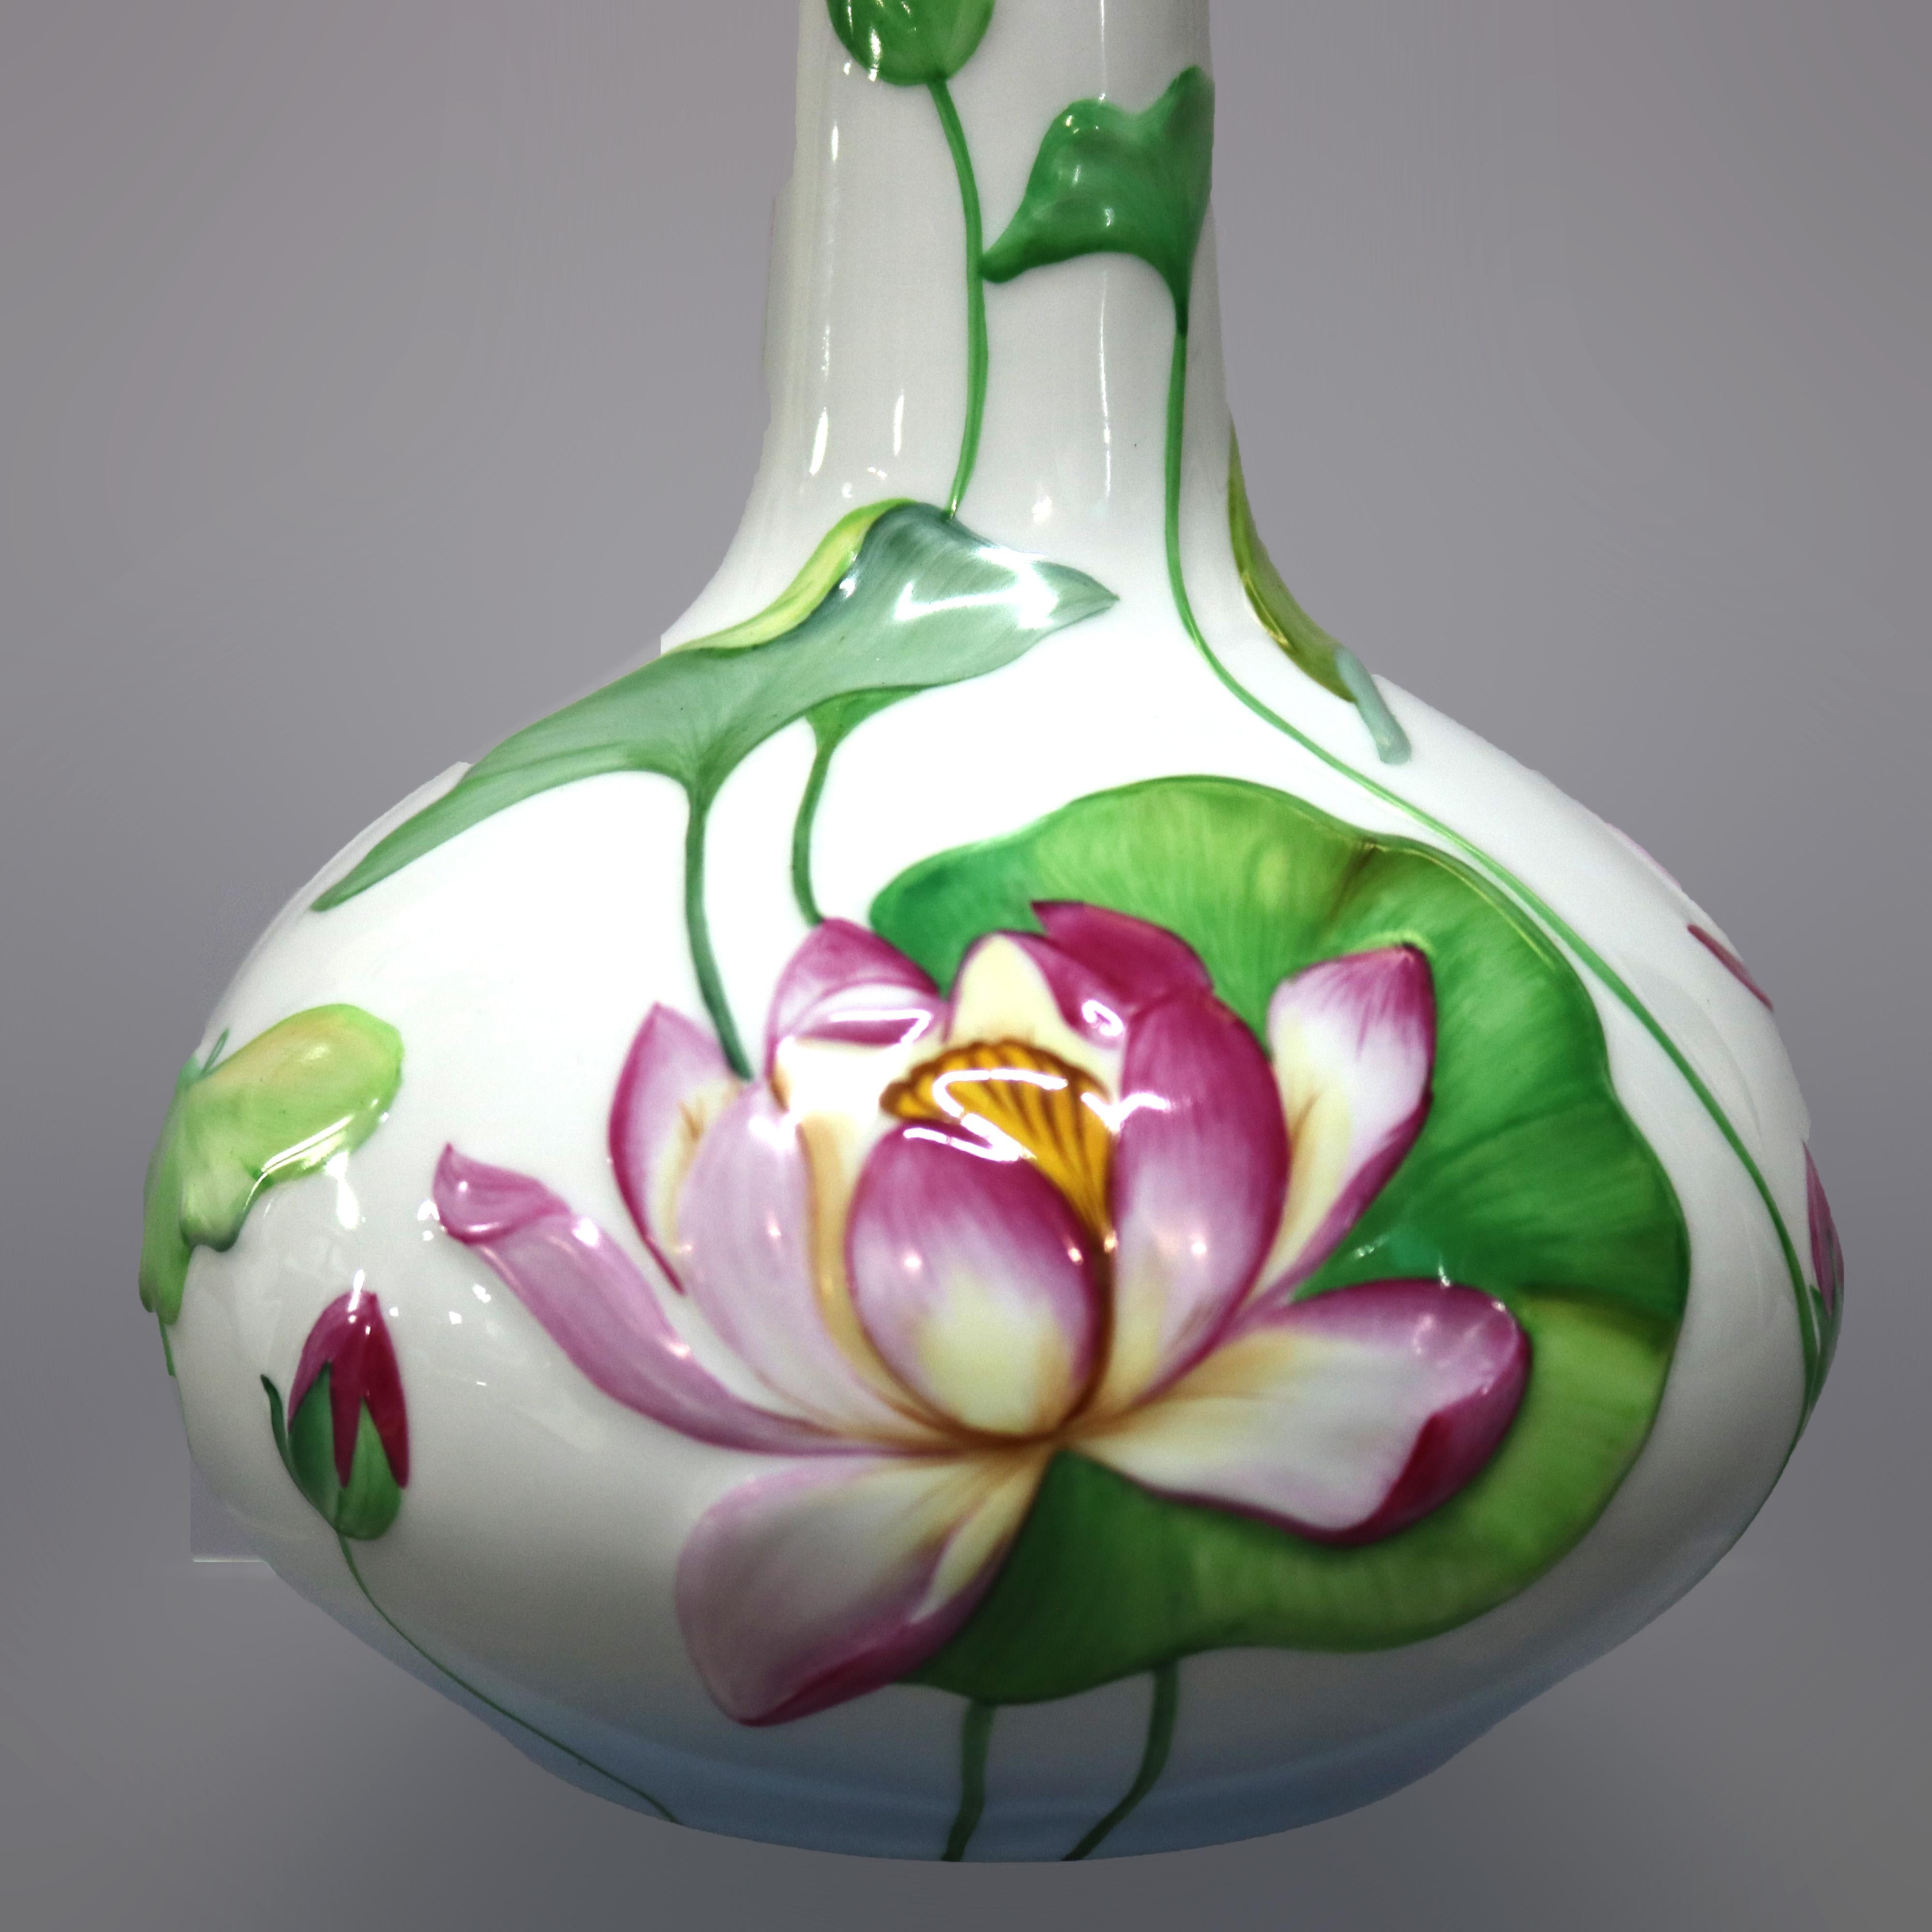 An antique vase by Herend, Hungary offers porcelain construction with hand painted lily pads and flowers, 20th century. 

Measures: 11.25